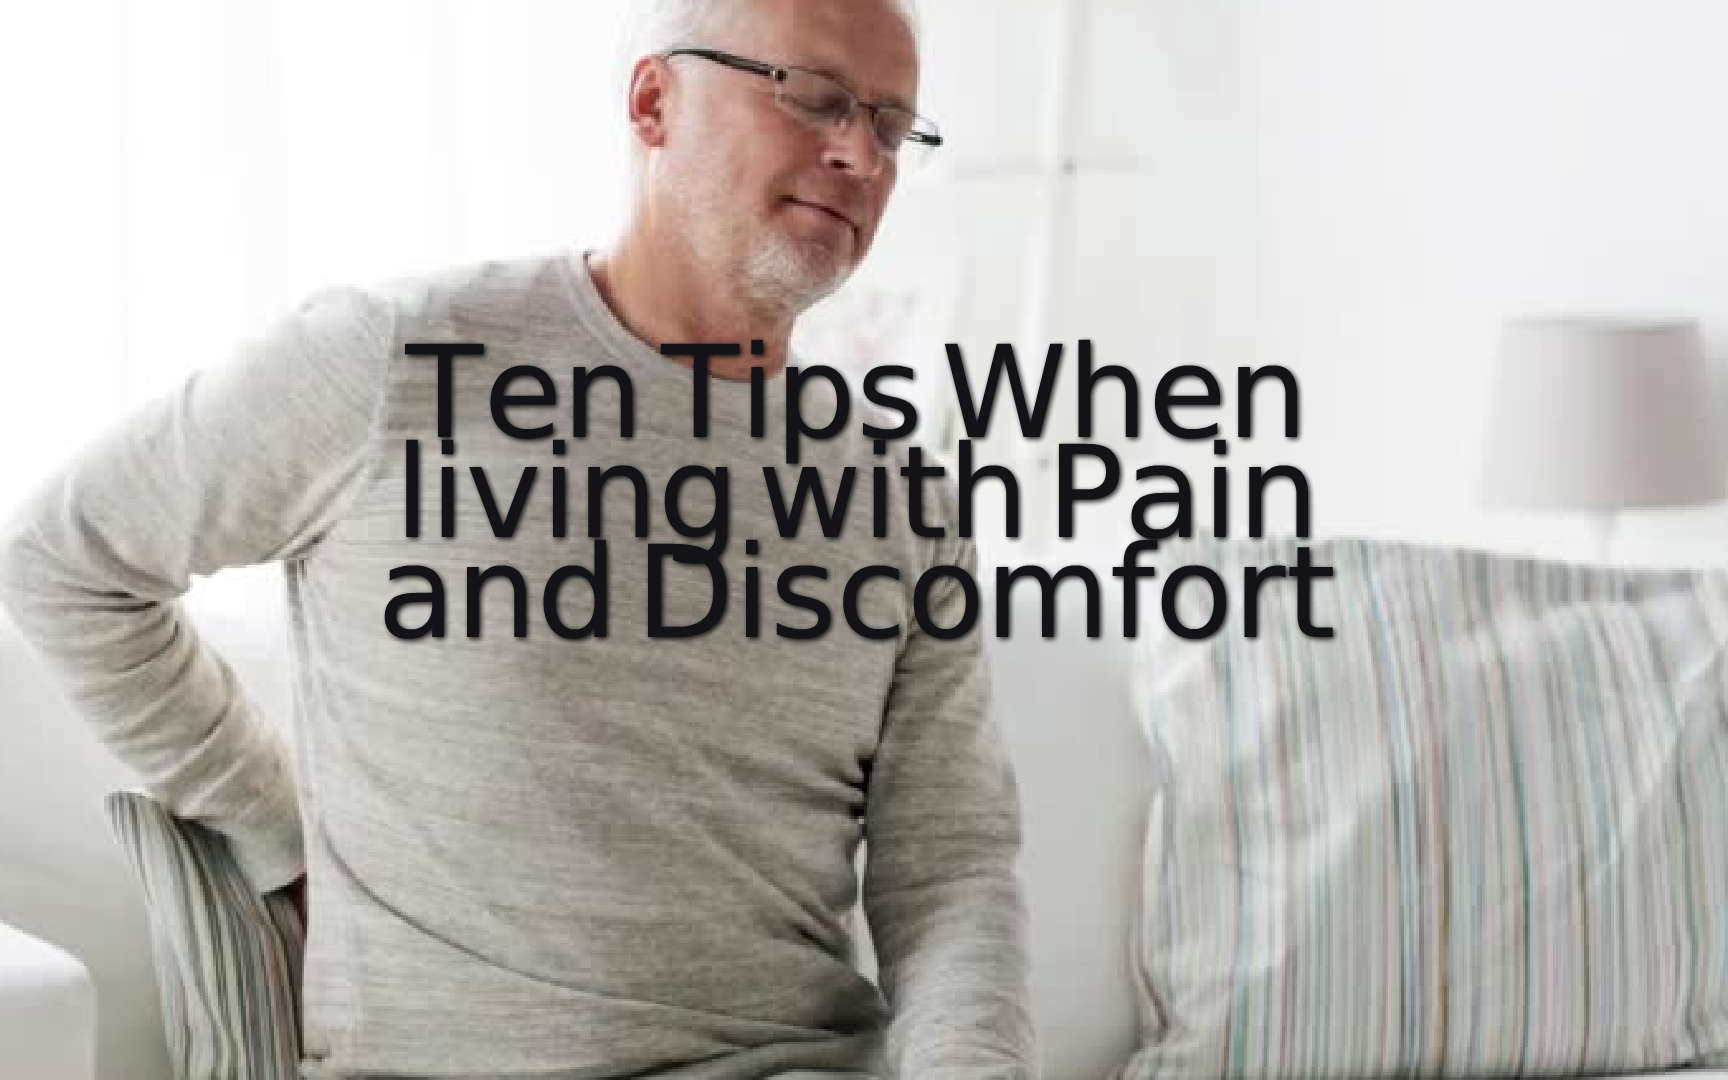 Living with pain and discomfort